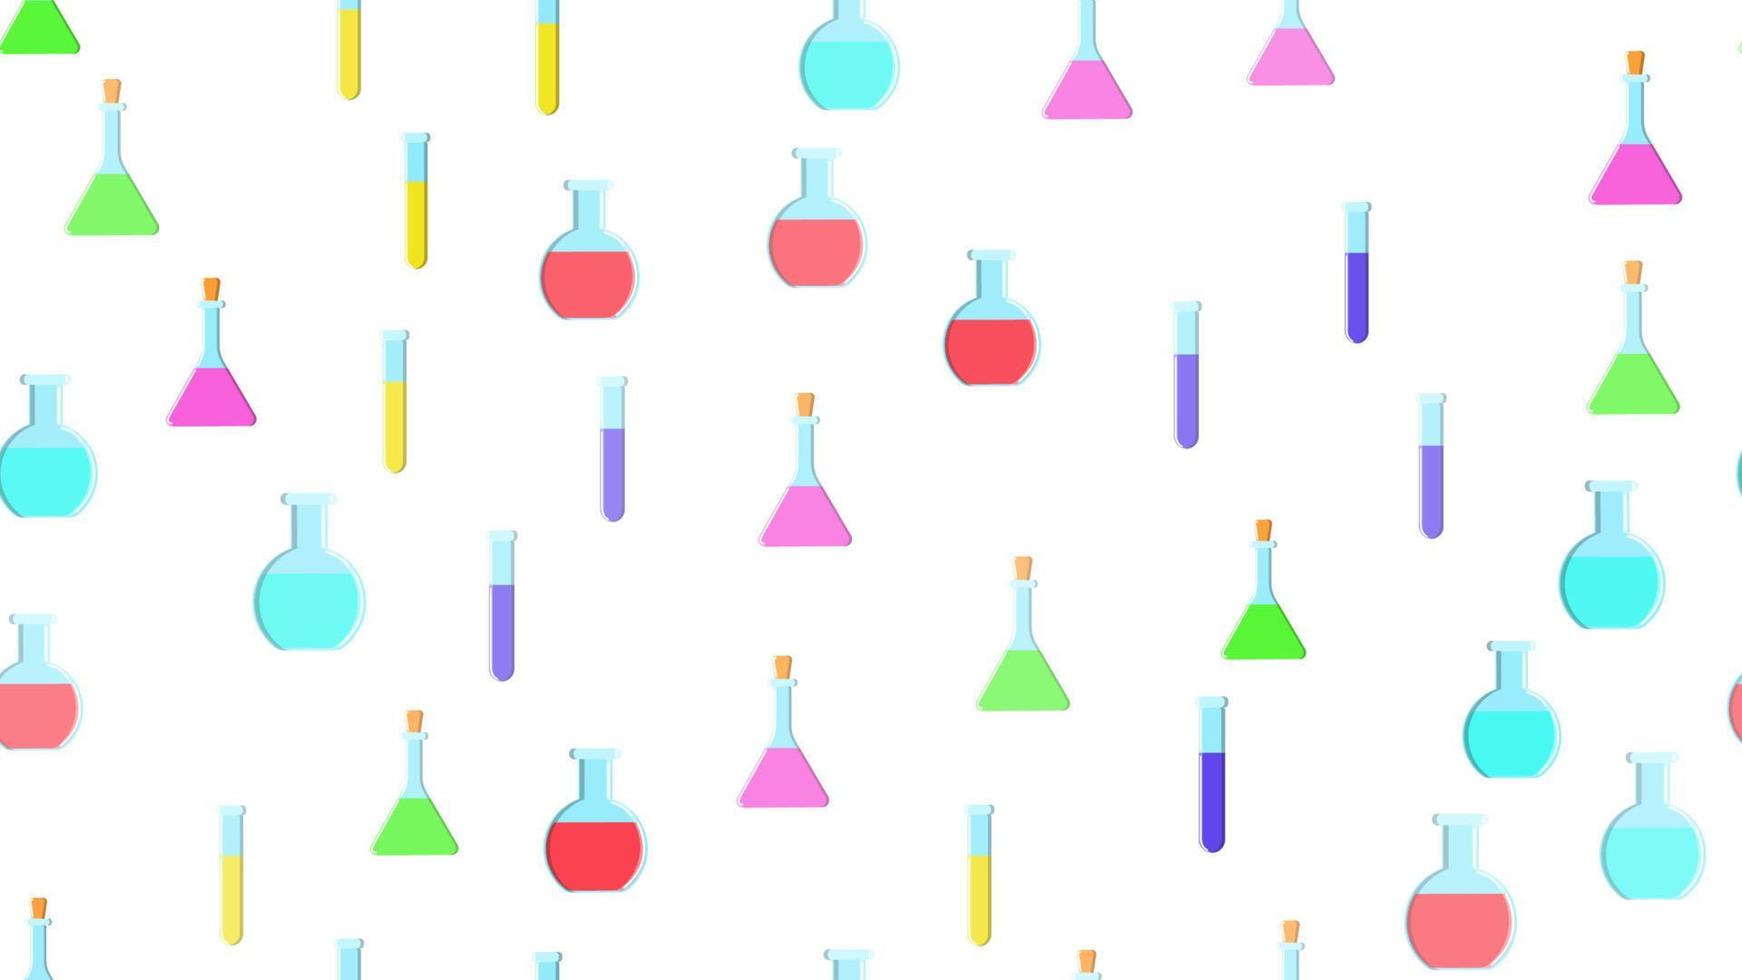 Seamless pattern texture of endless repeating multi-colored medical chemical glass scientific test tubes of flasks of different shapes on white background. Vector illustration